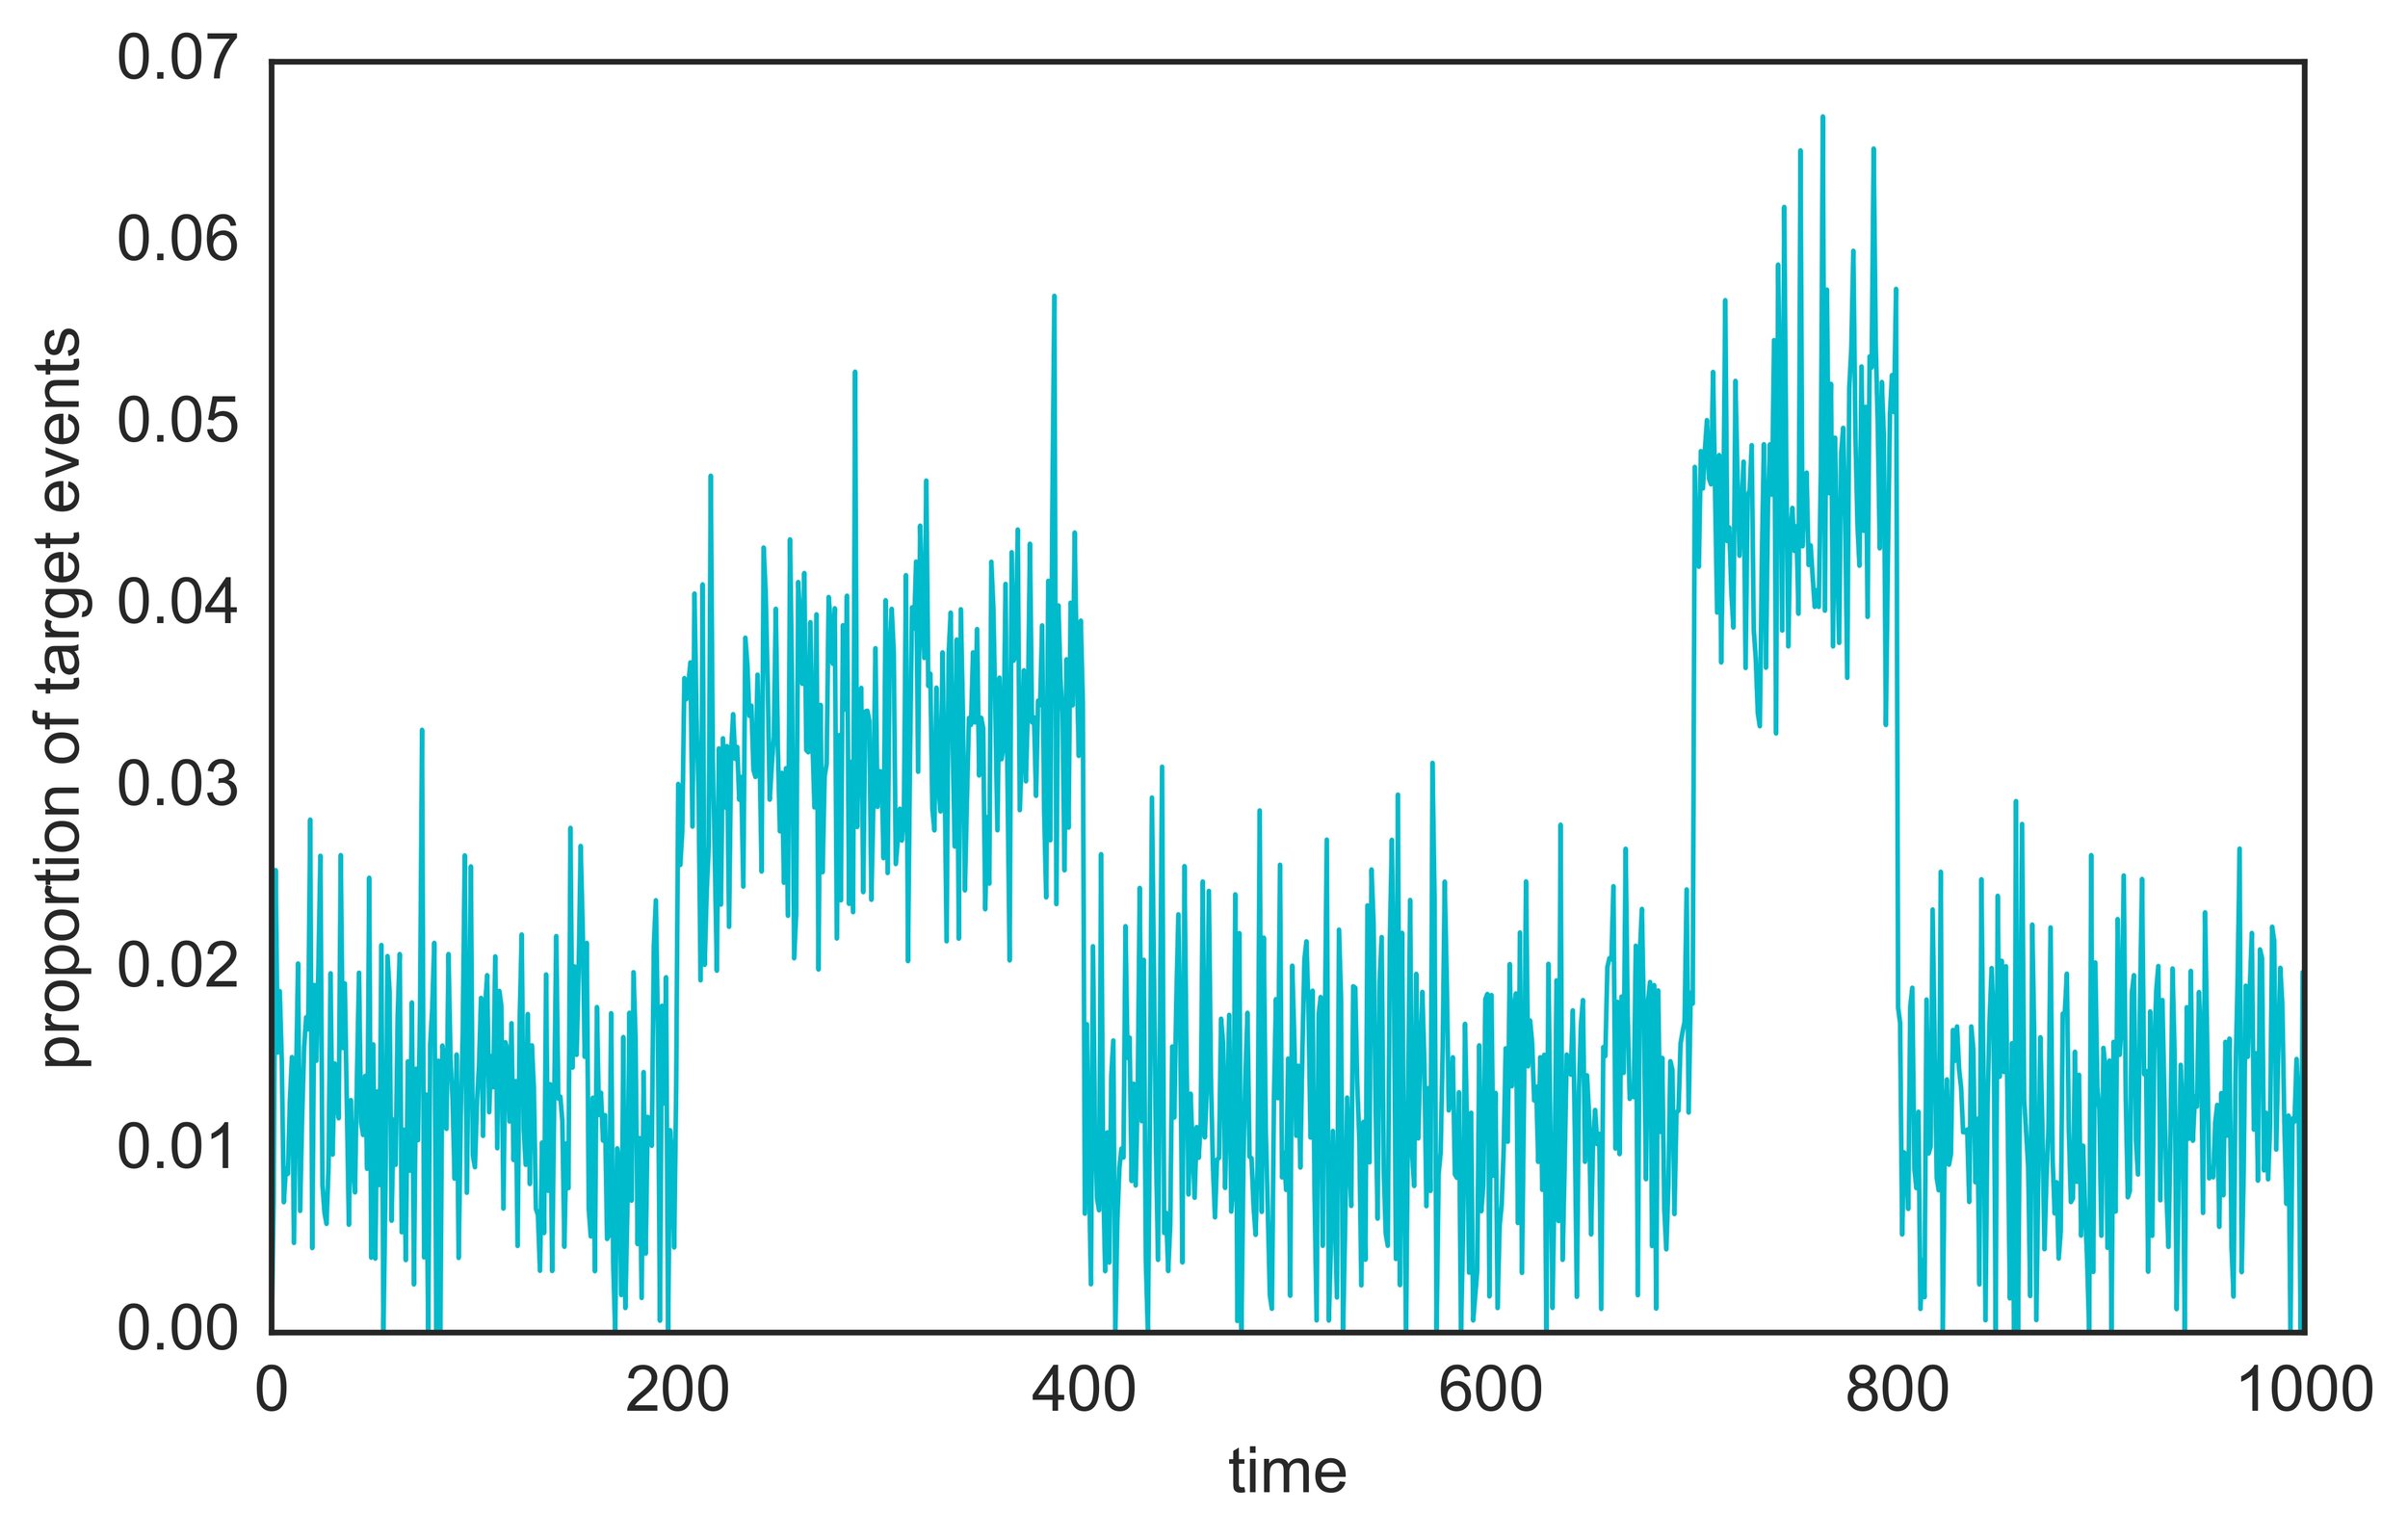 Detecting ‘bursts’ in time series data with Kleinberg’s burst detection ...